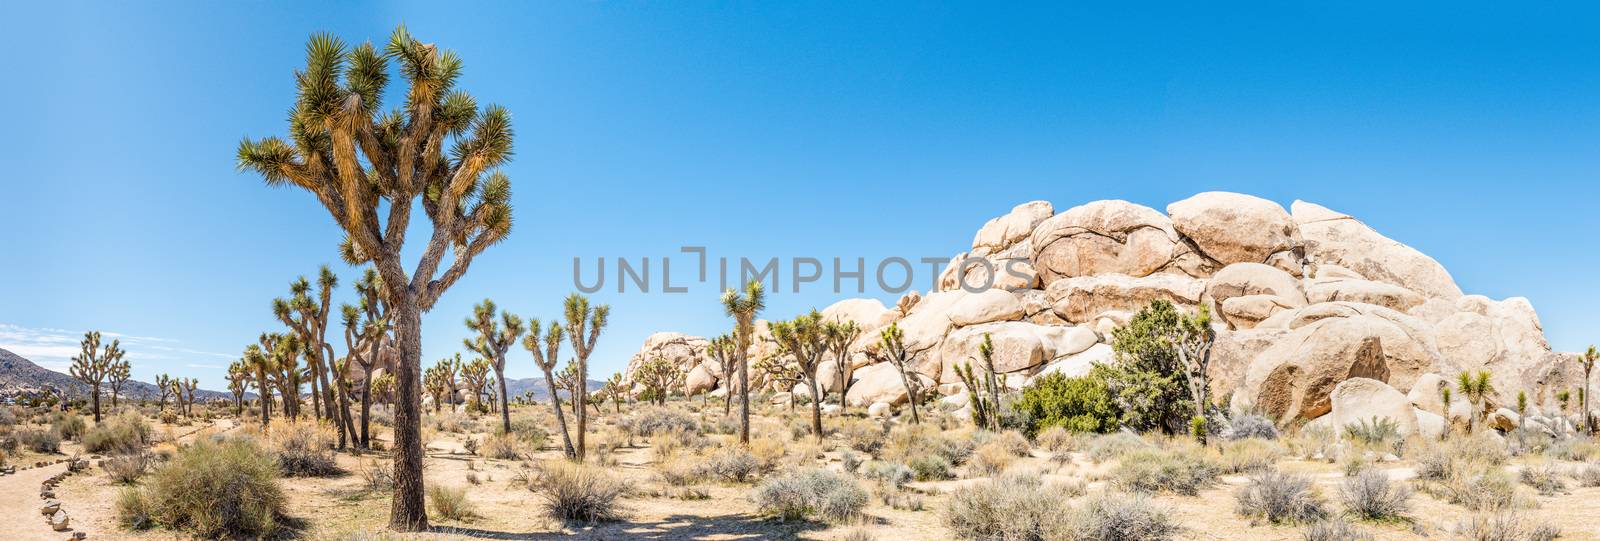 Panorama of Joshua trees (Yucca brevifolia) in Hall of Horrors a by Njean